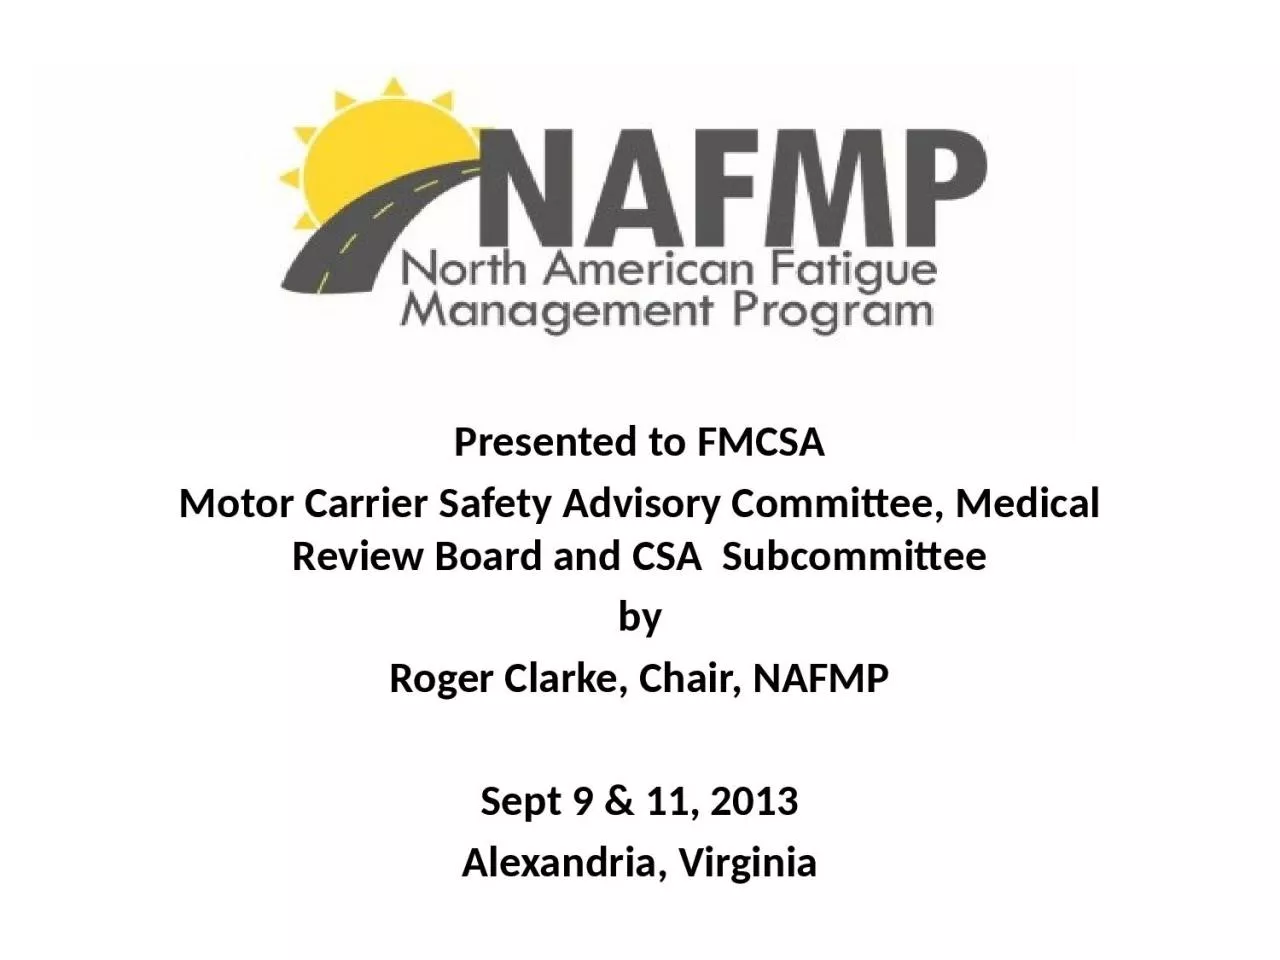 Presented  to FMCSA Motor Carrier Safety Advisory Committee, Medical Review Board and